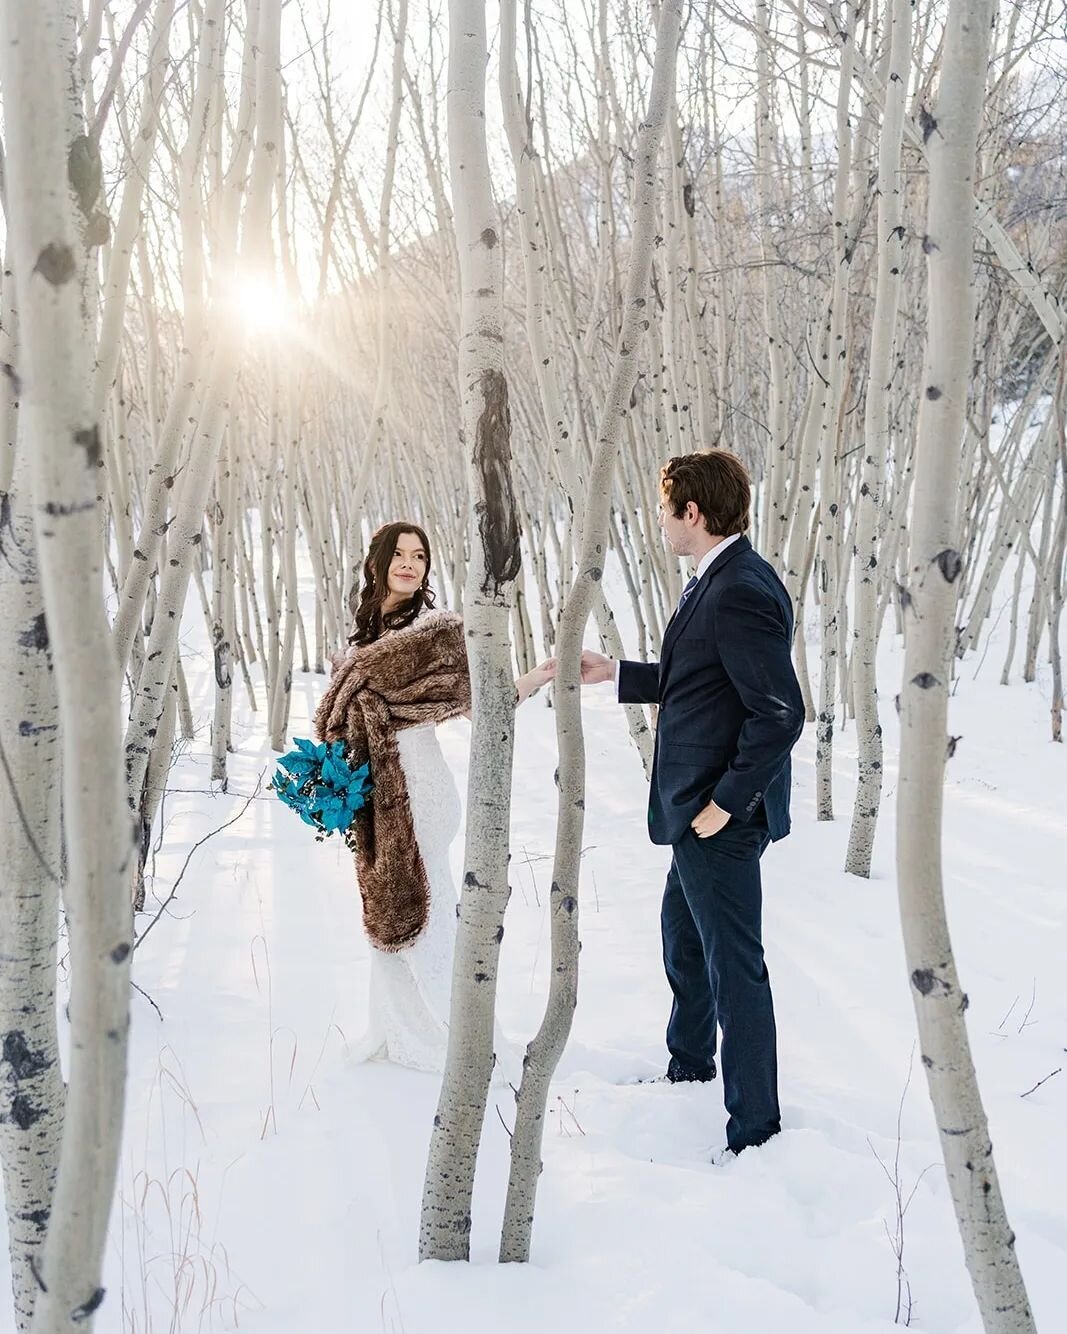 Capture Your Cozy and Intimate Winter Elopement with Sam Immer Photography's Personalized Elopement Photography Services.